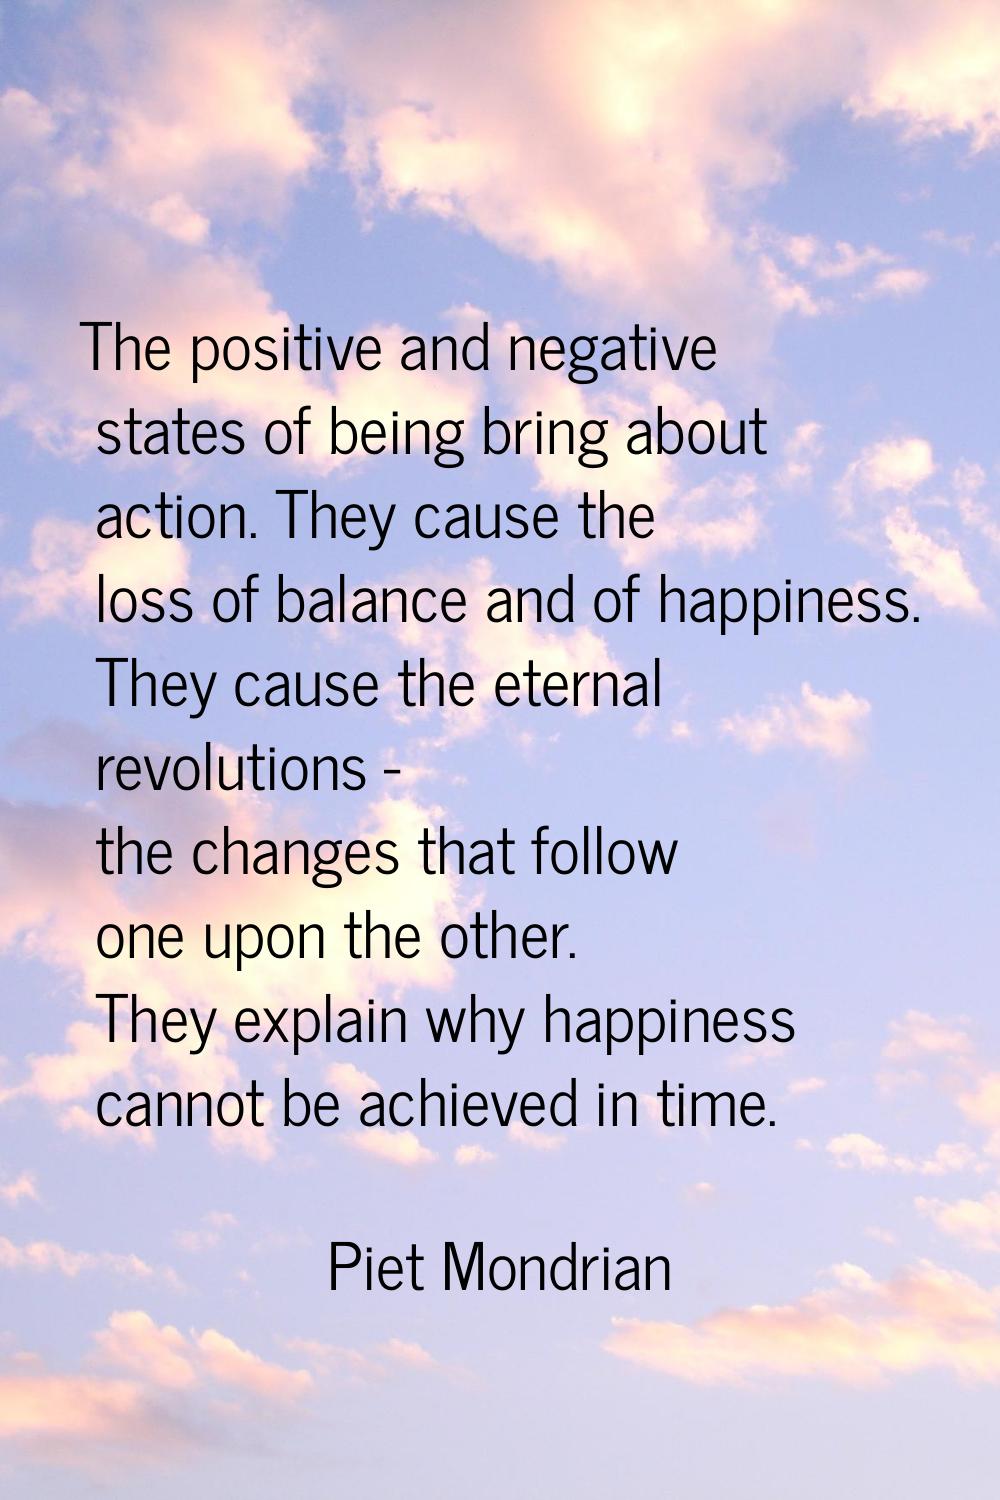 The positive and negative states of being bring about action. They cause the loss of balance and of